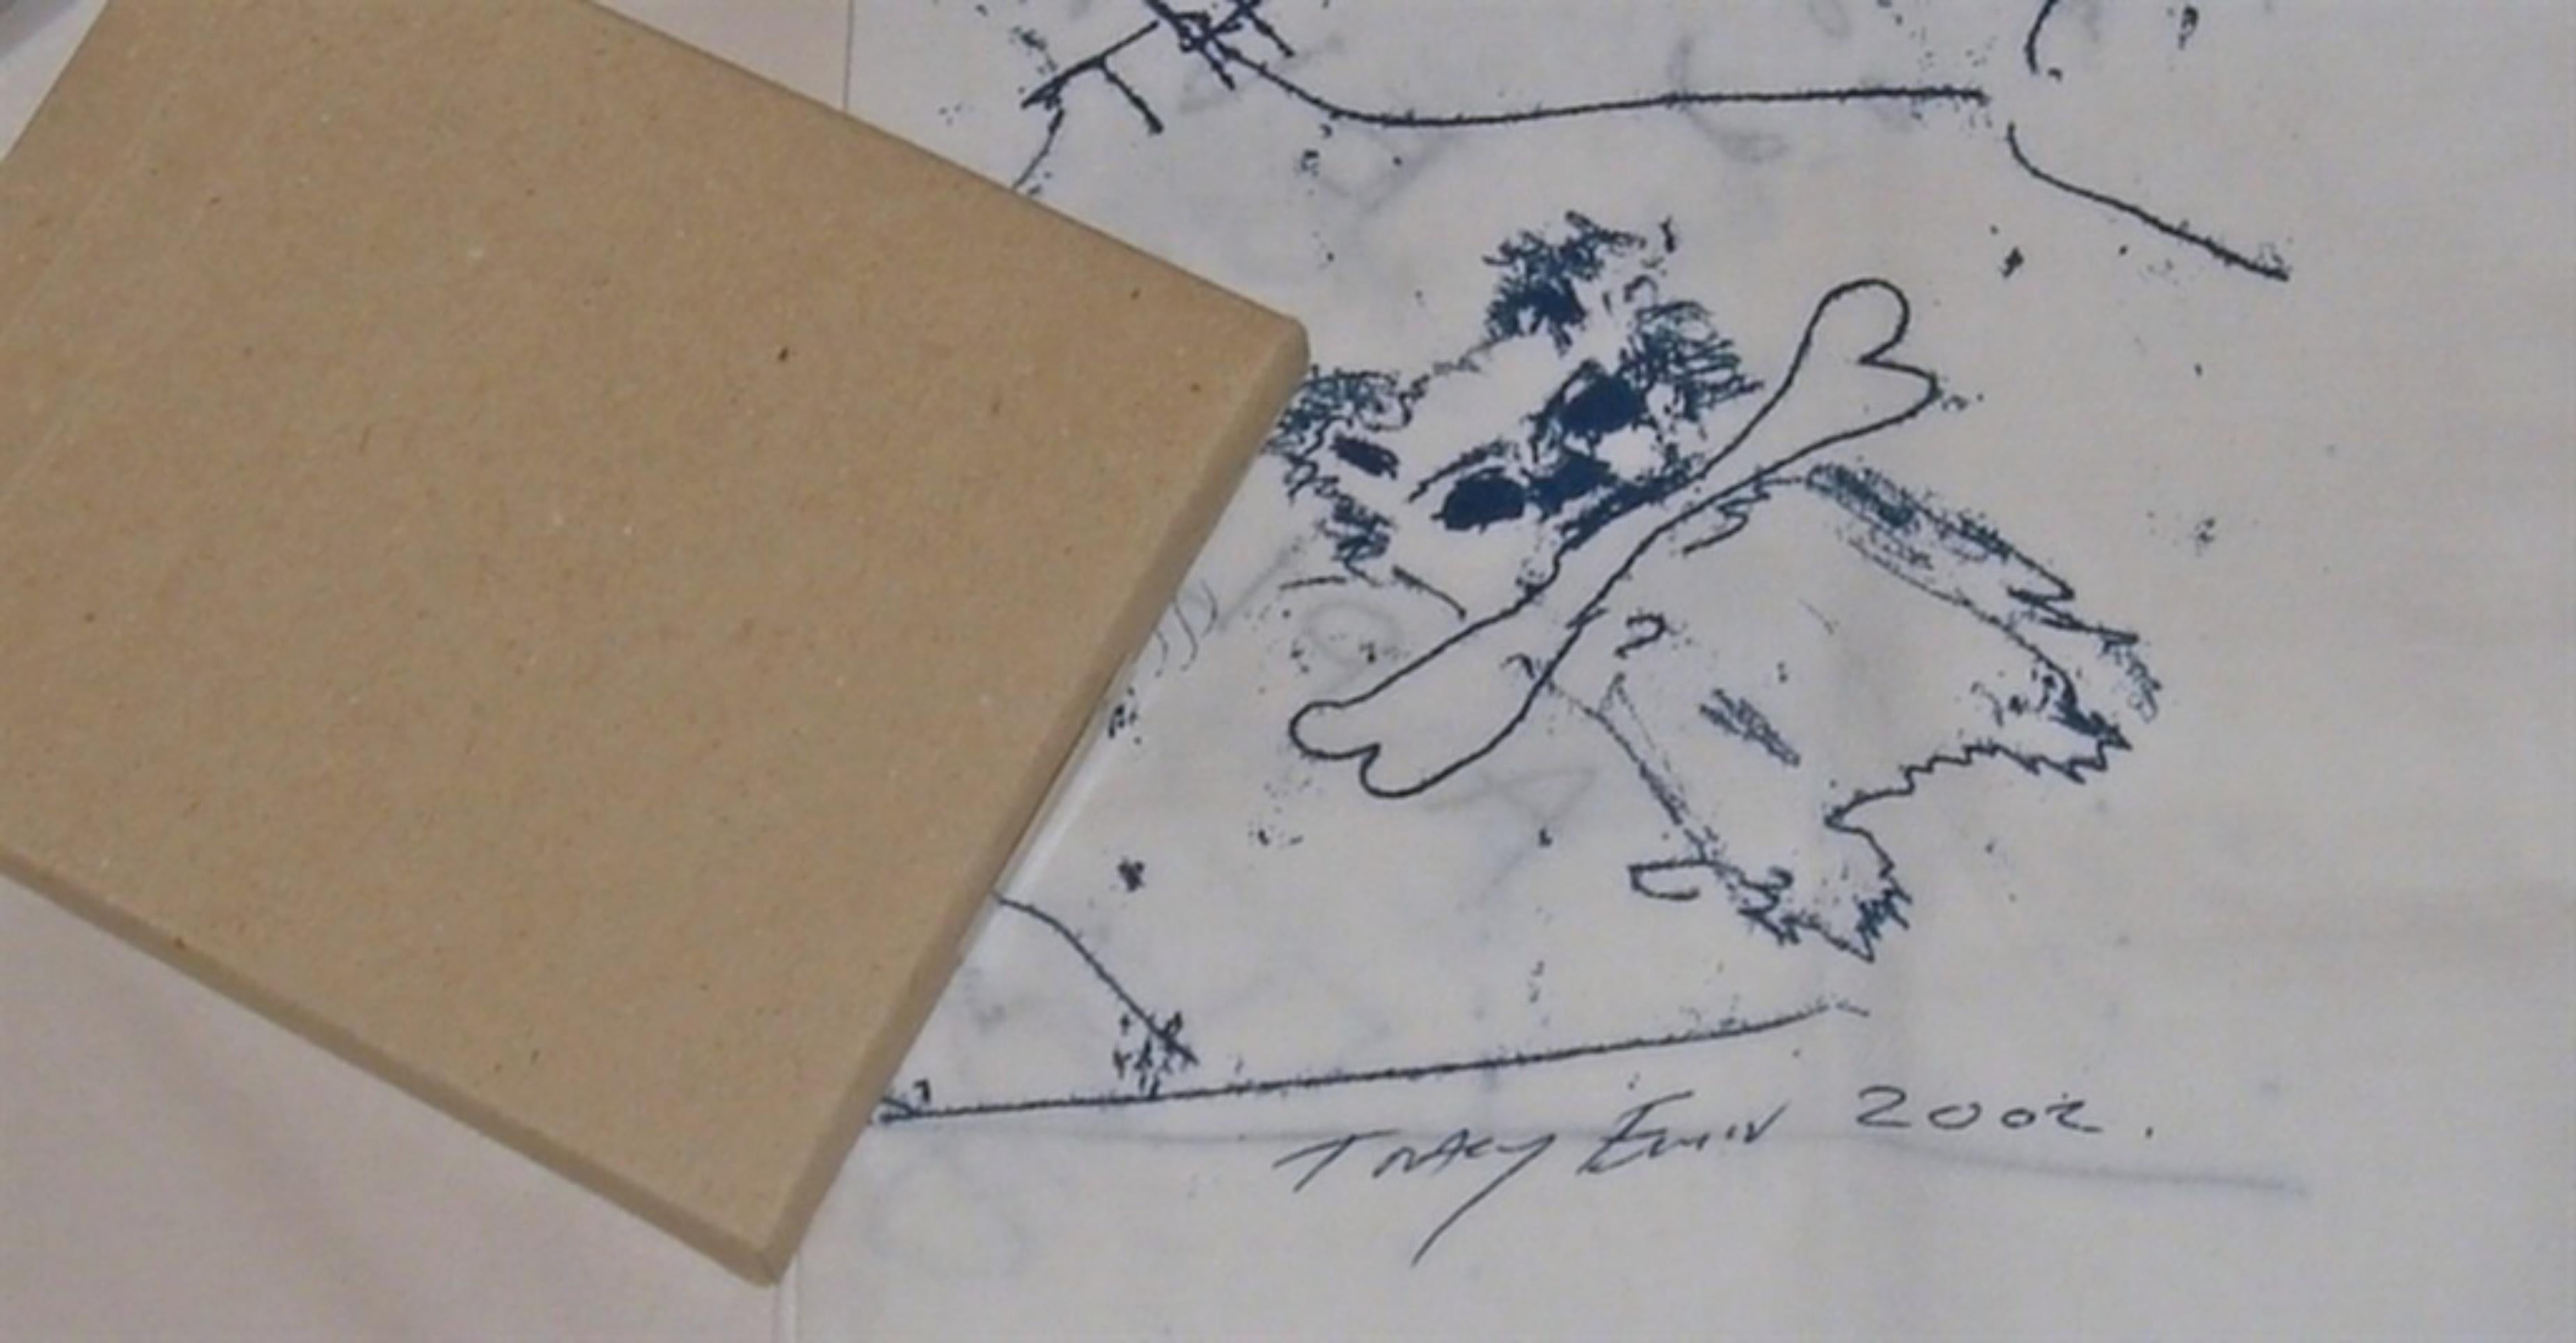 Everybody Needs a Place to Think (Limited Edition textile in original BBC4 box) - Contemporary Print by Tracey Emin